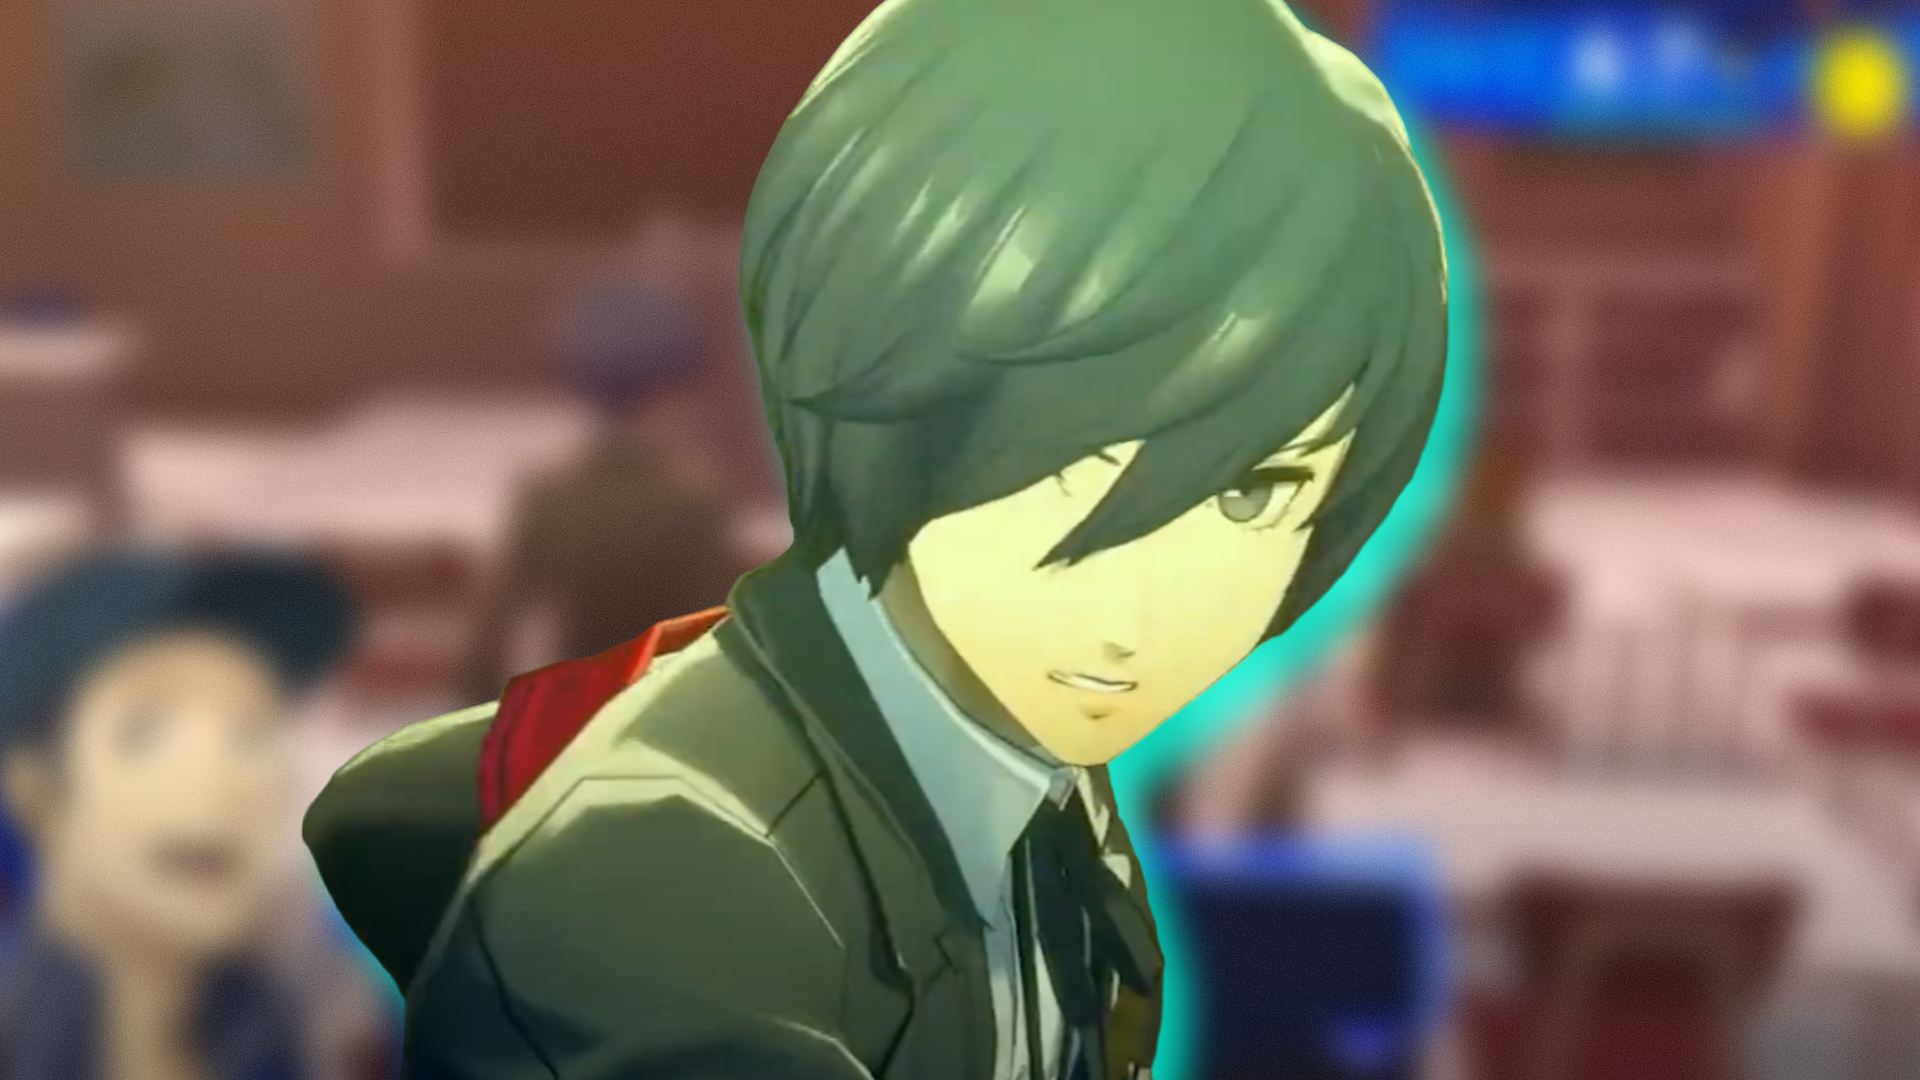 Persona 3 Reload review - not quite the definitive version